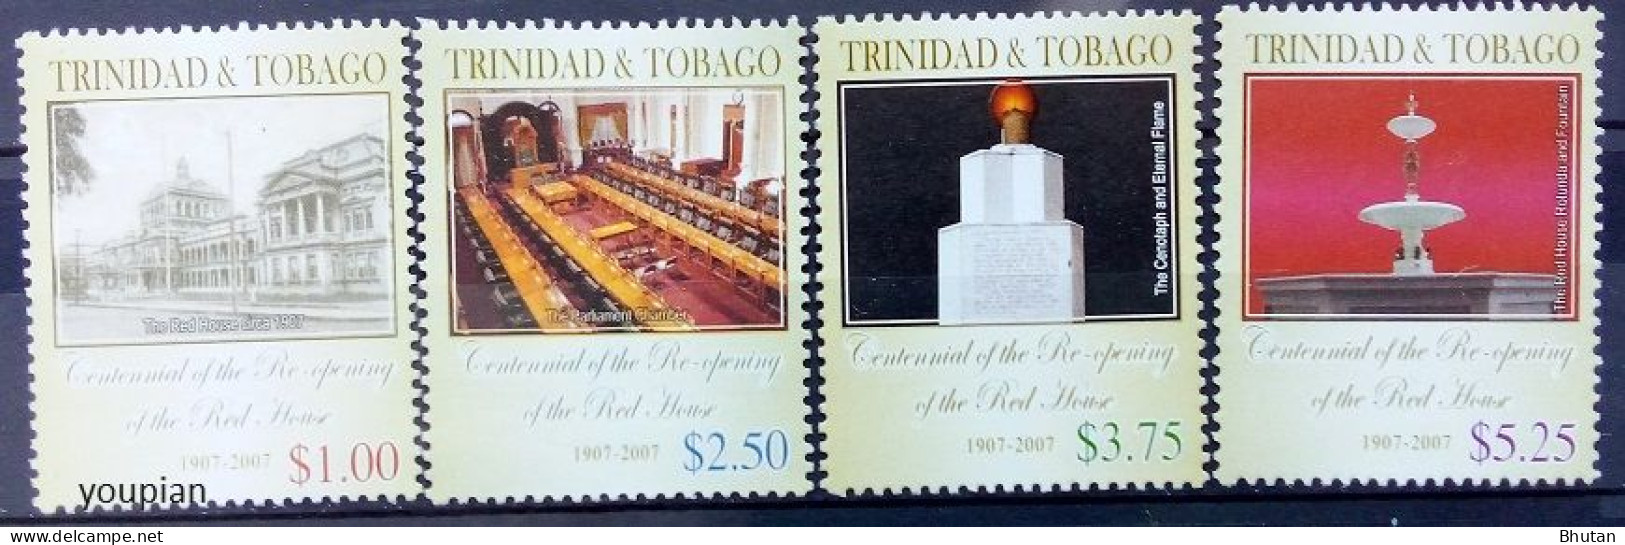 Trinidad And Tobago 2007, 100th Anniversary Of The Inauguration Of The New Parliament Building, MNH Stamps Set - Trinité & Tobago (1962-...)